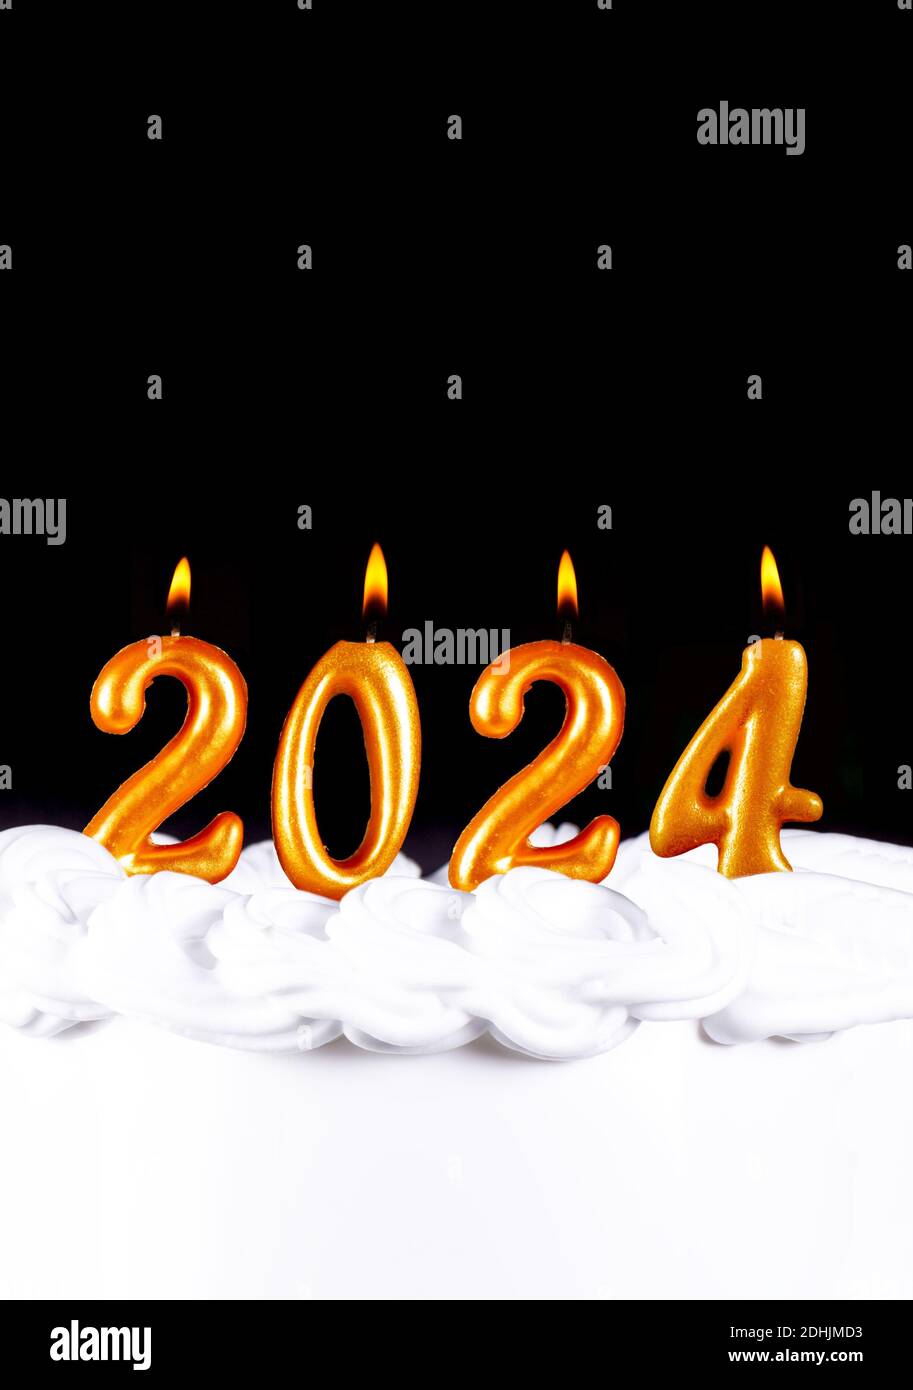 Four golden candles write numbers flame happy new year 2024 black background Stock Photo